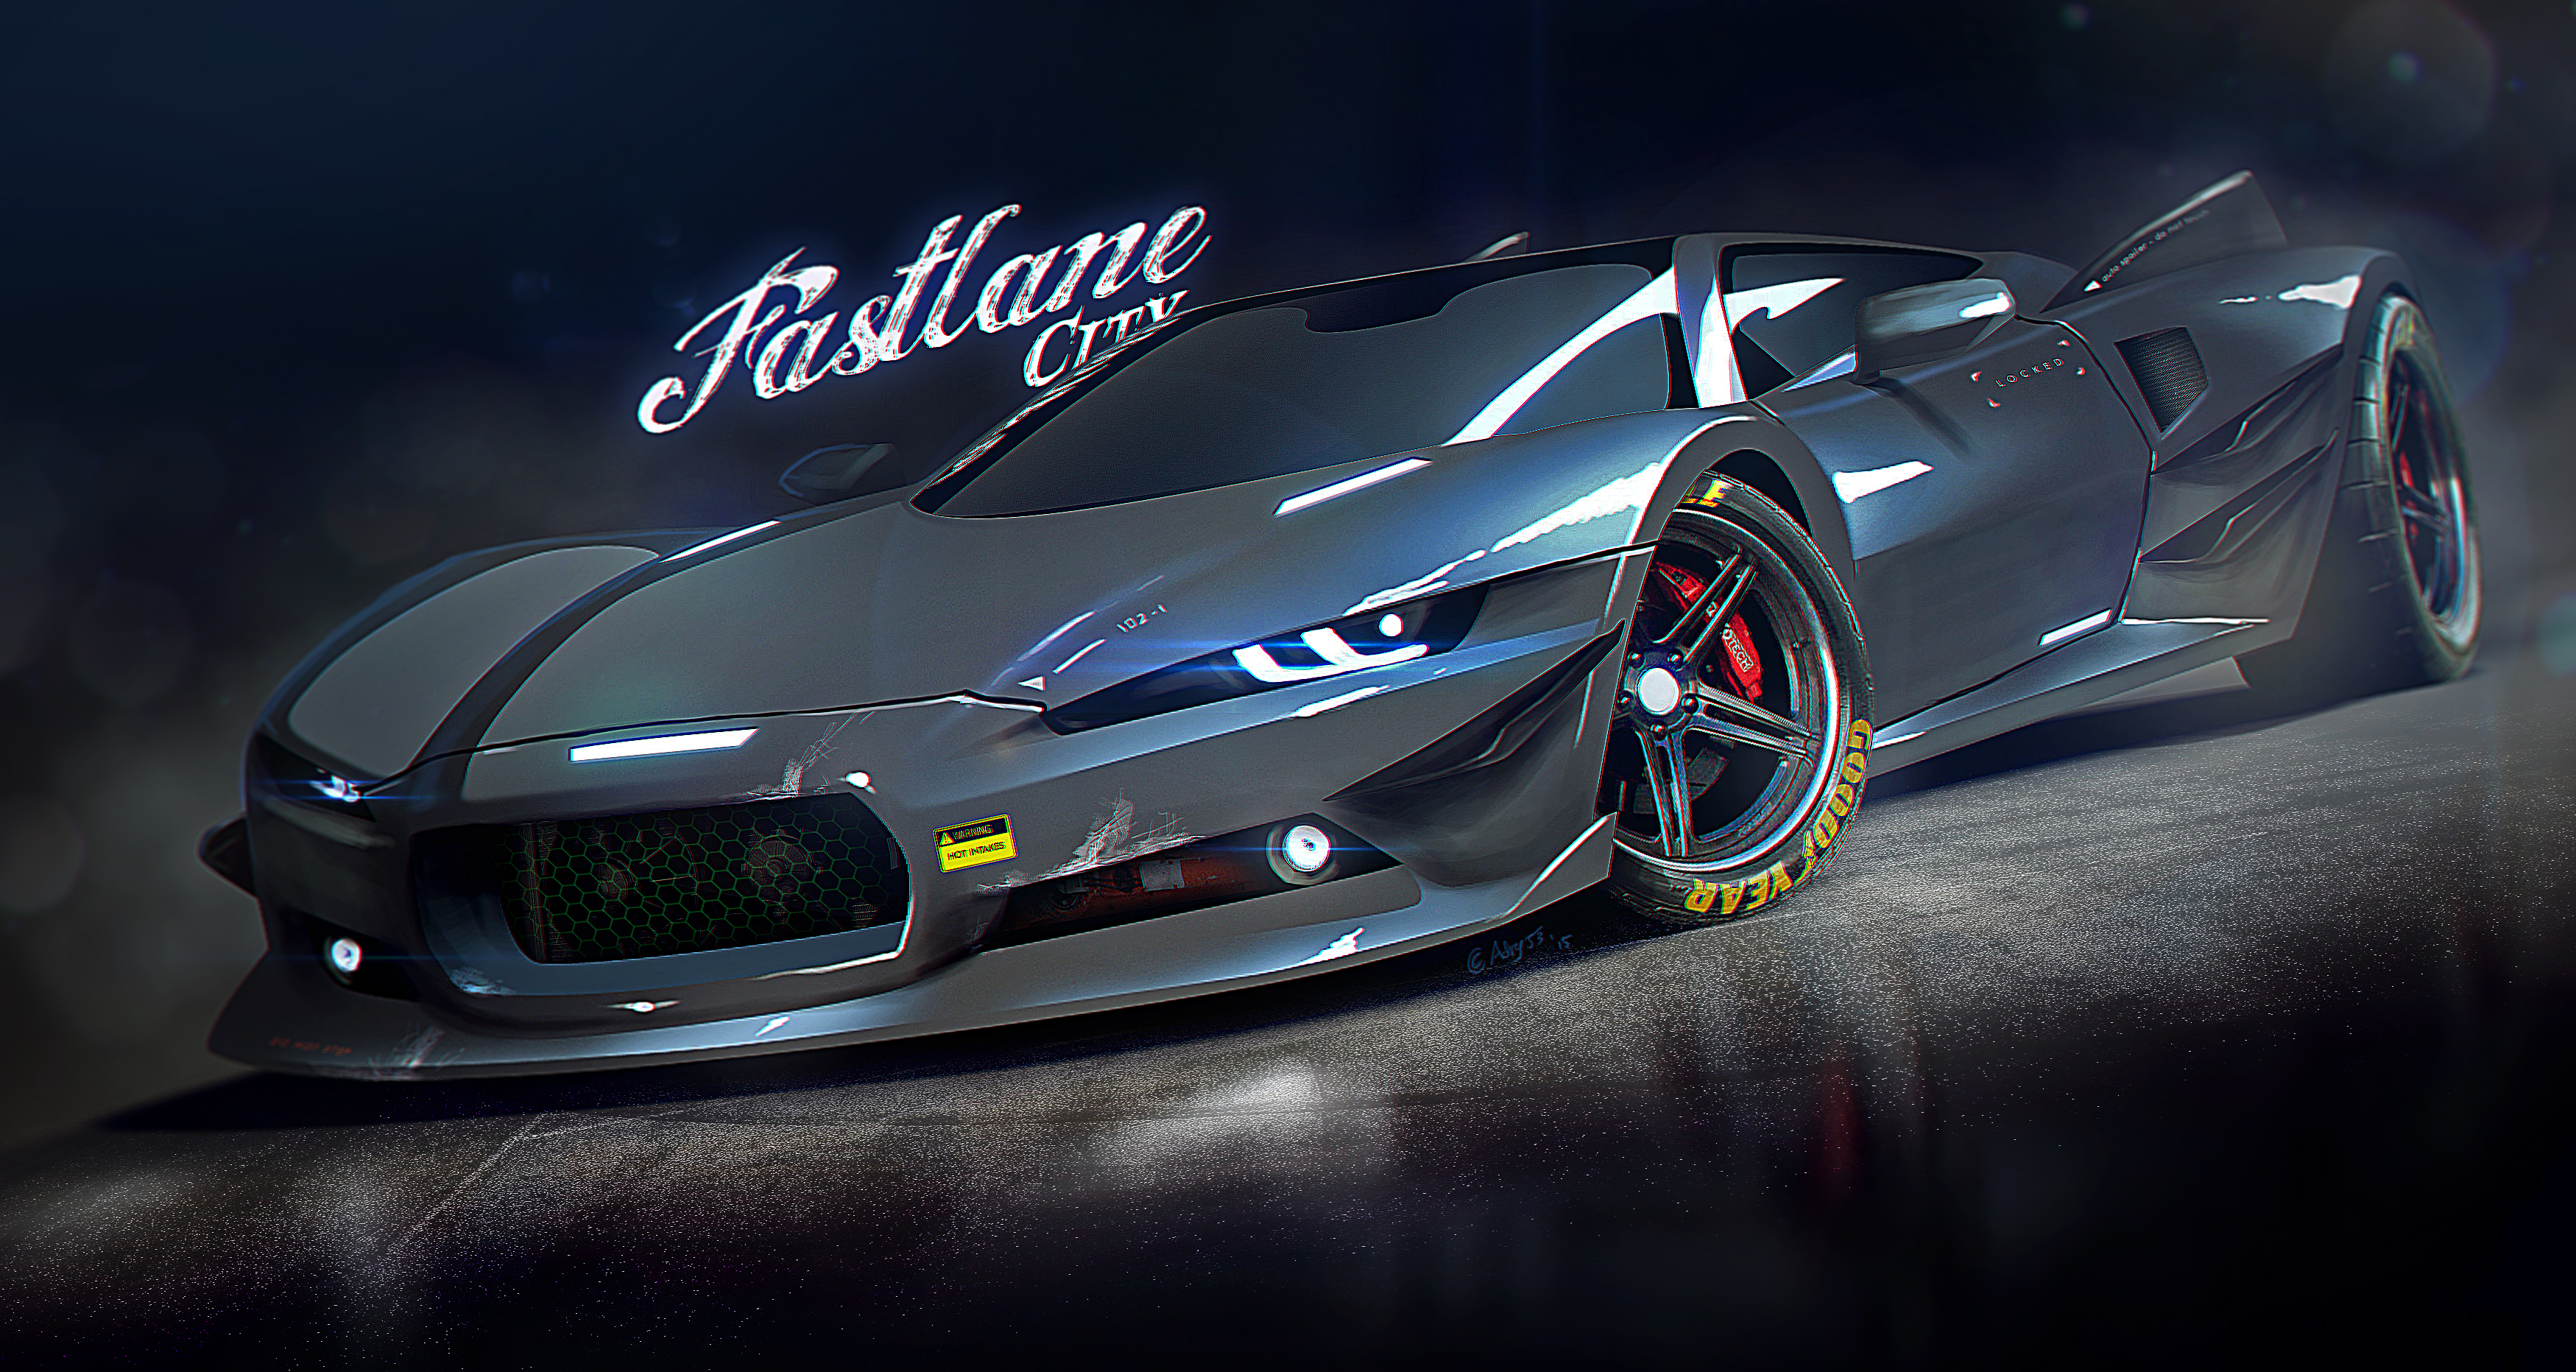 Vehicles Artistic HD Wallpaper | Background Image